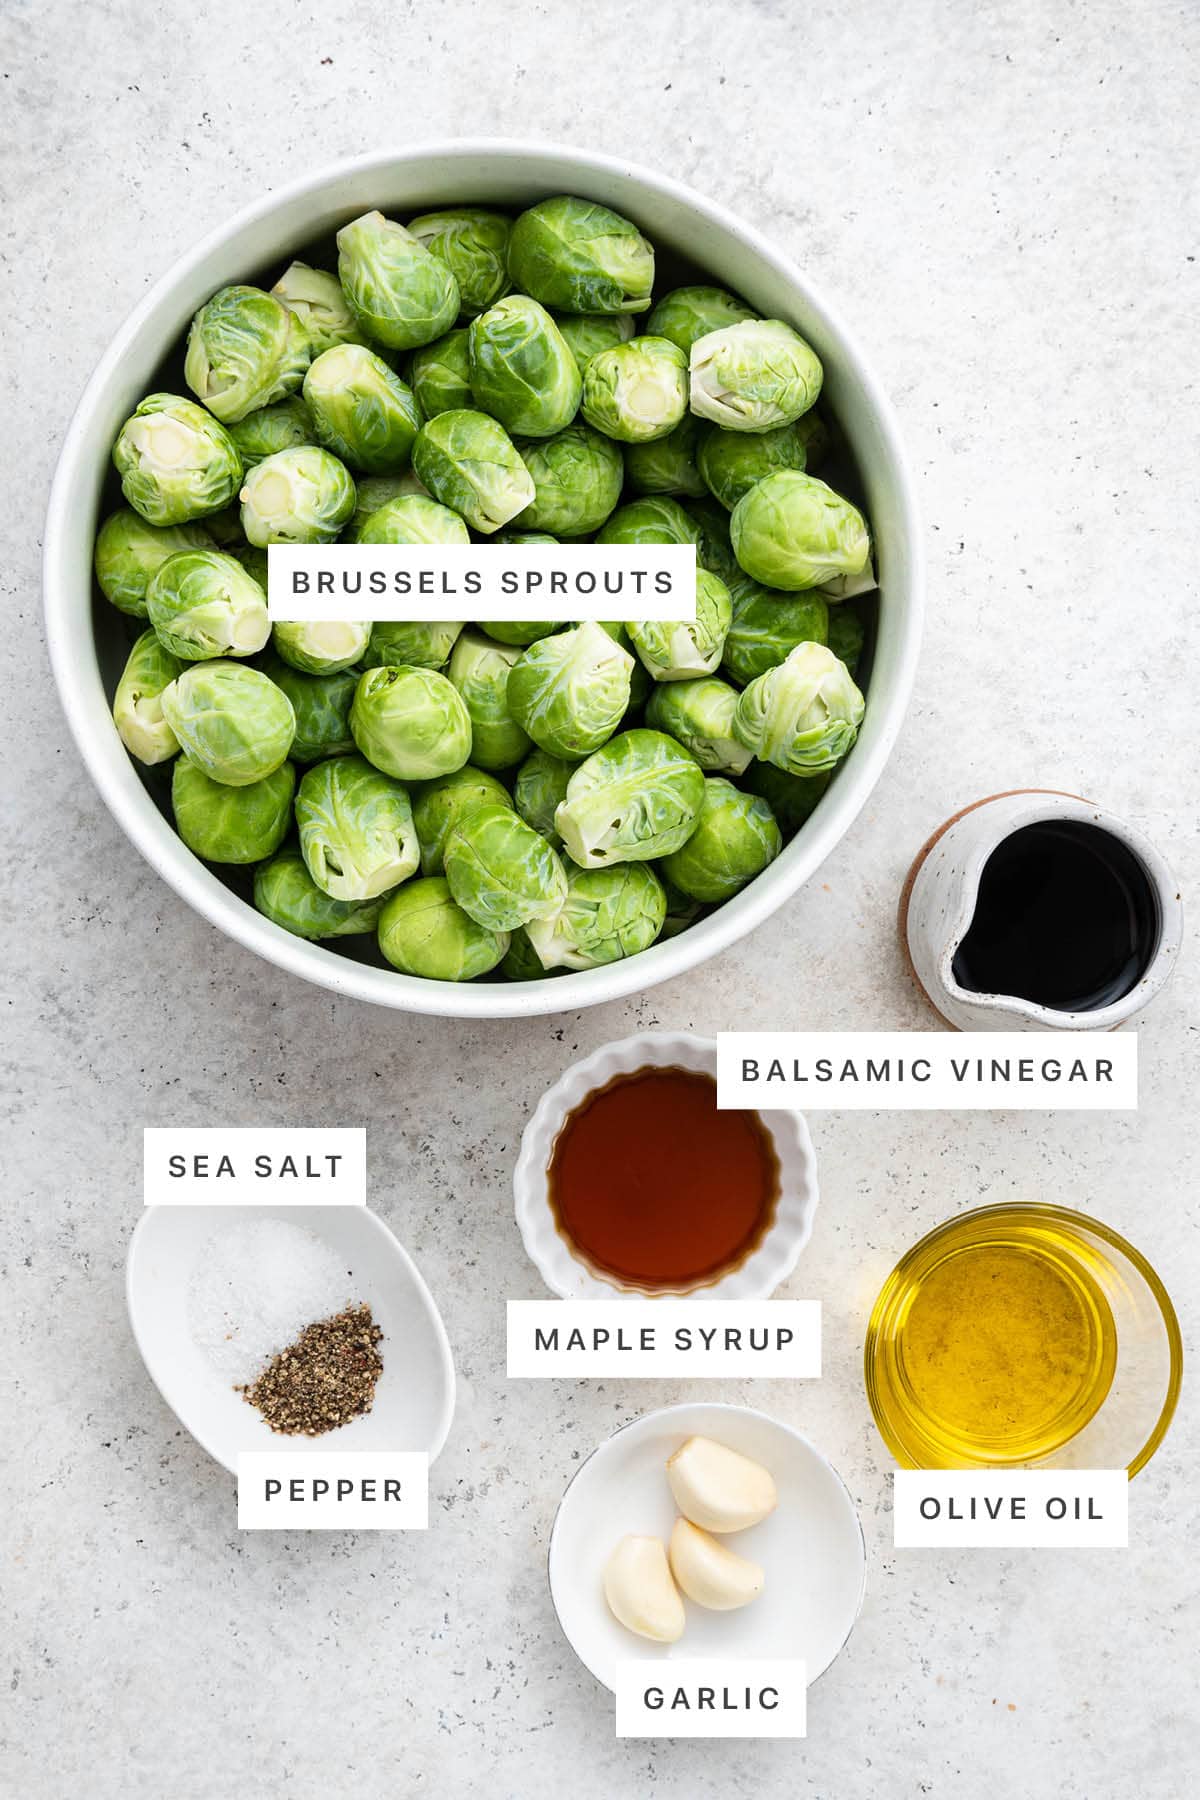 Ingredients measured out to make Balsamic Roasted Brussels Sprouts: brussels sprouts, balsamic vinegar, sea salt, pepper, maple syrup, garlic and olive oil.